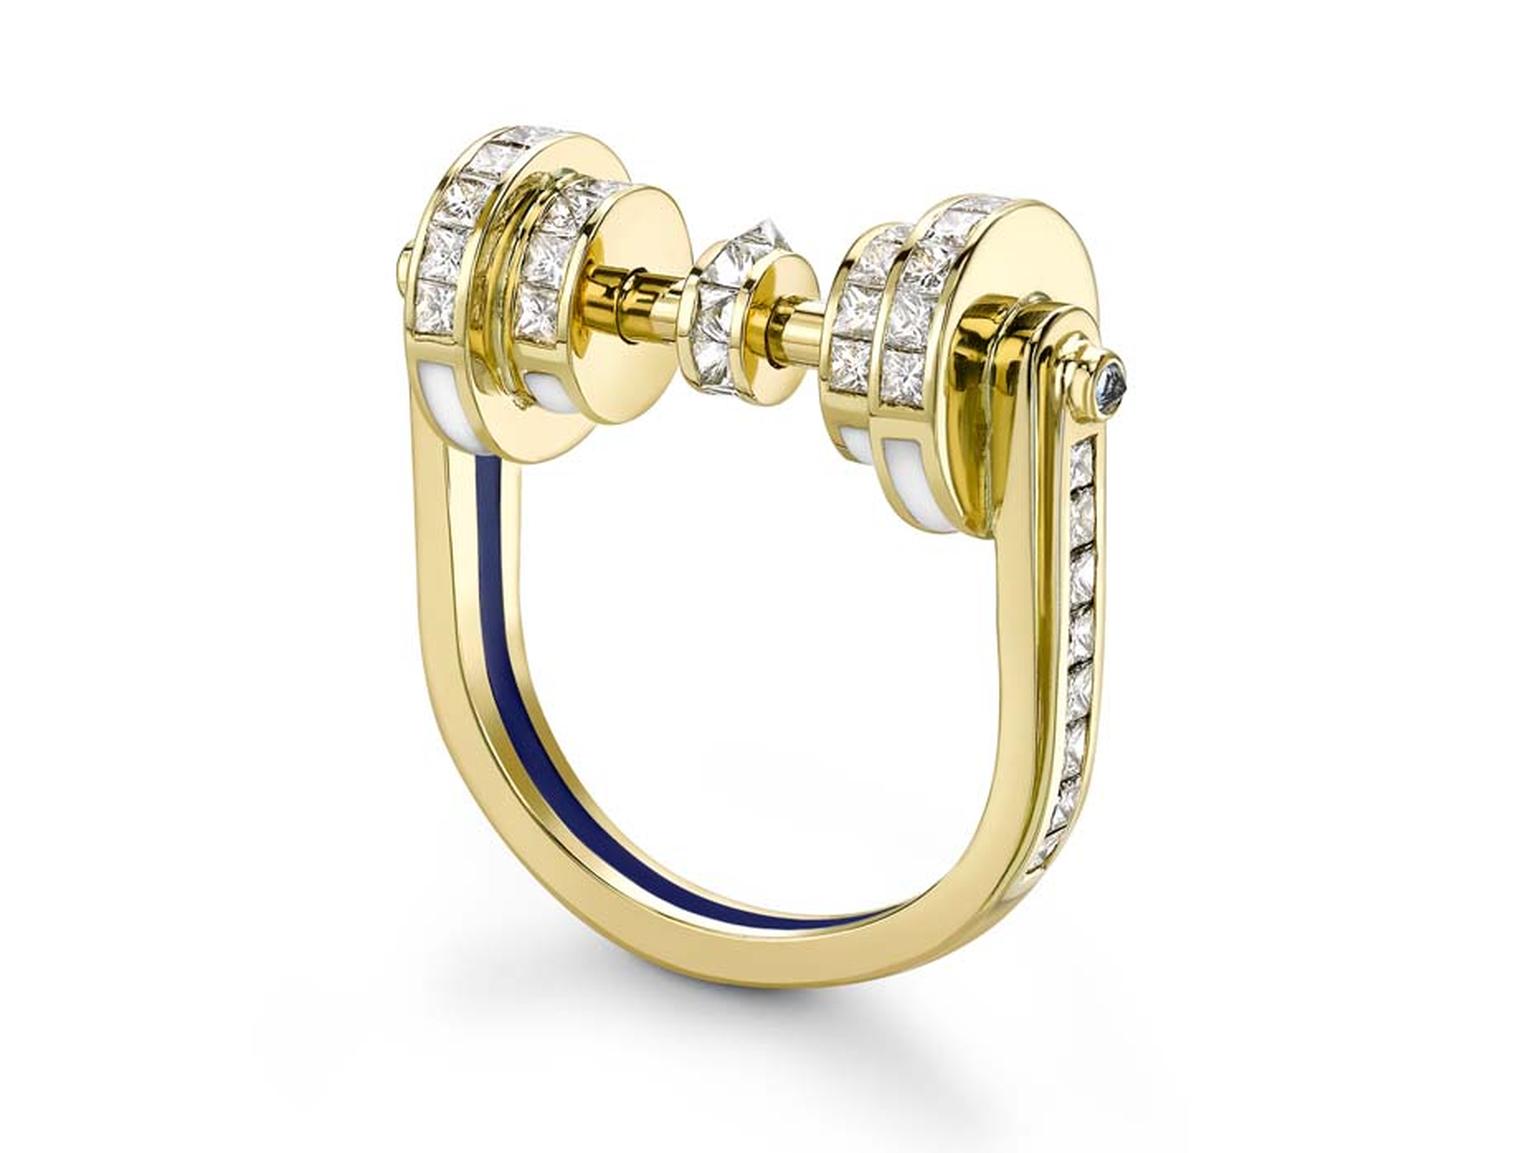 Emma Franklin diamond engagement ring in yellow gold with channel-set diamonds on all surfaces, blue sapphires, and enamel lines in blue and white.